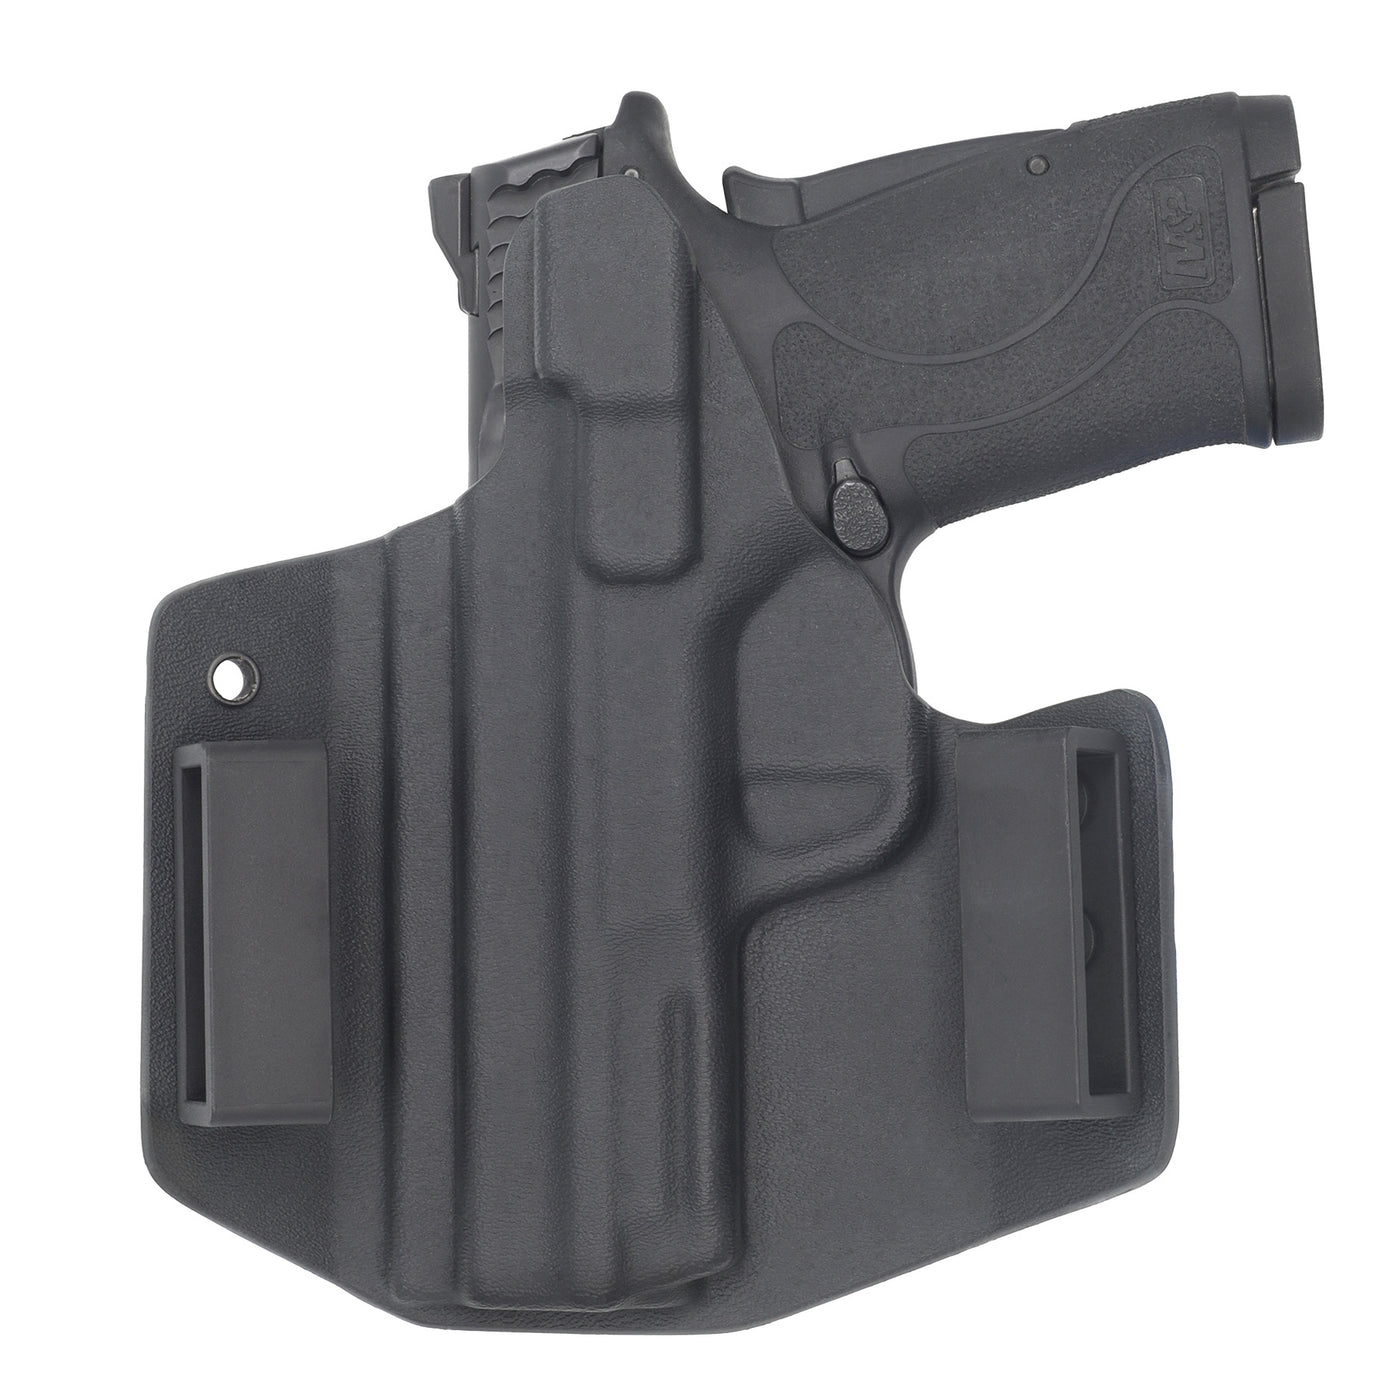 C&G Holsters custom OWB Covert M&P Shield 380EZ in holstered position back view